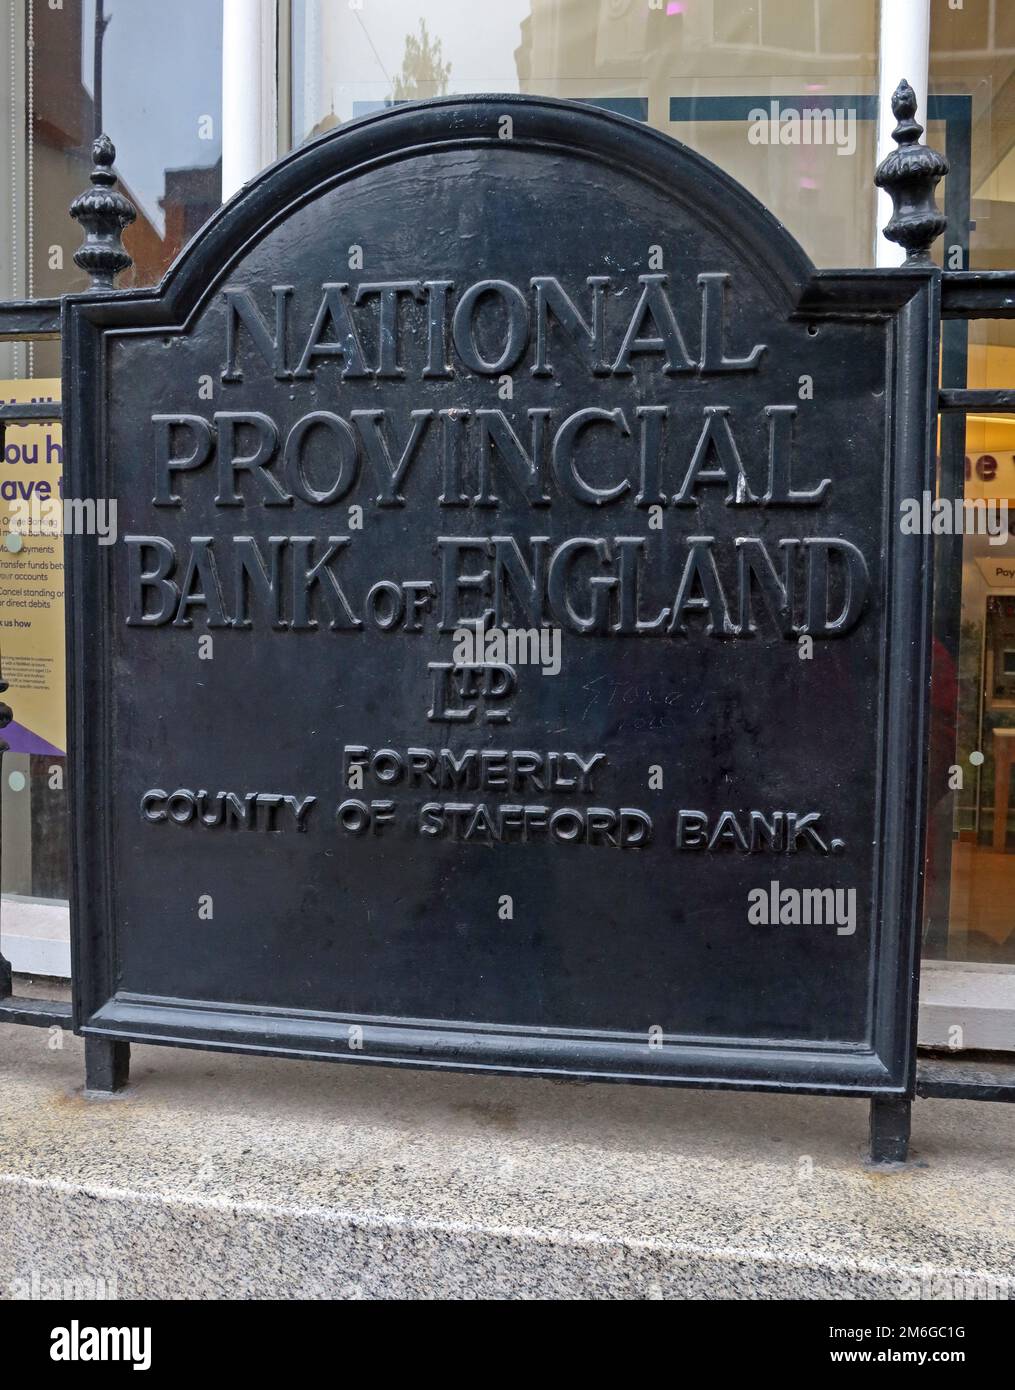 Sign showing National Provincial Bank England, formerly county of Stafford Bank (NatWest), Queen Square, Wolverhampton,England, WV1 1TL Stock Photo